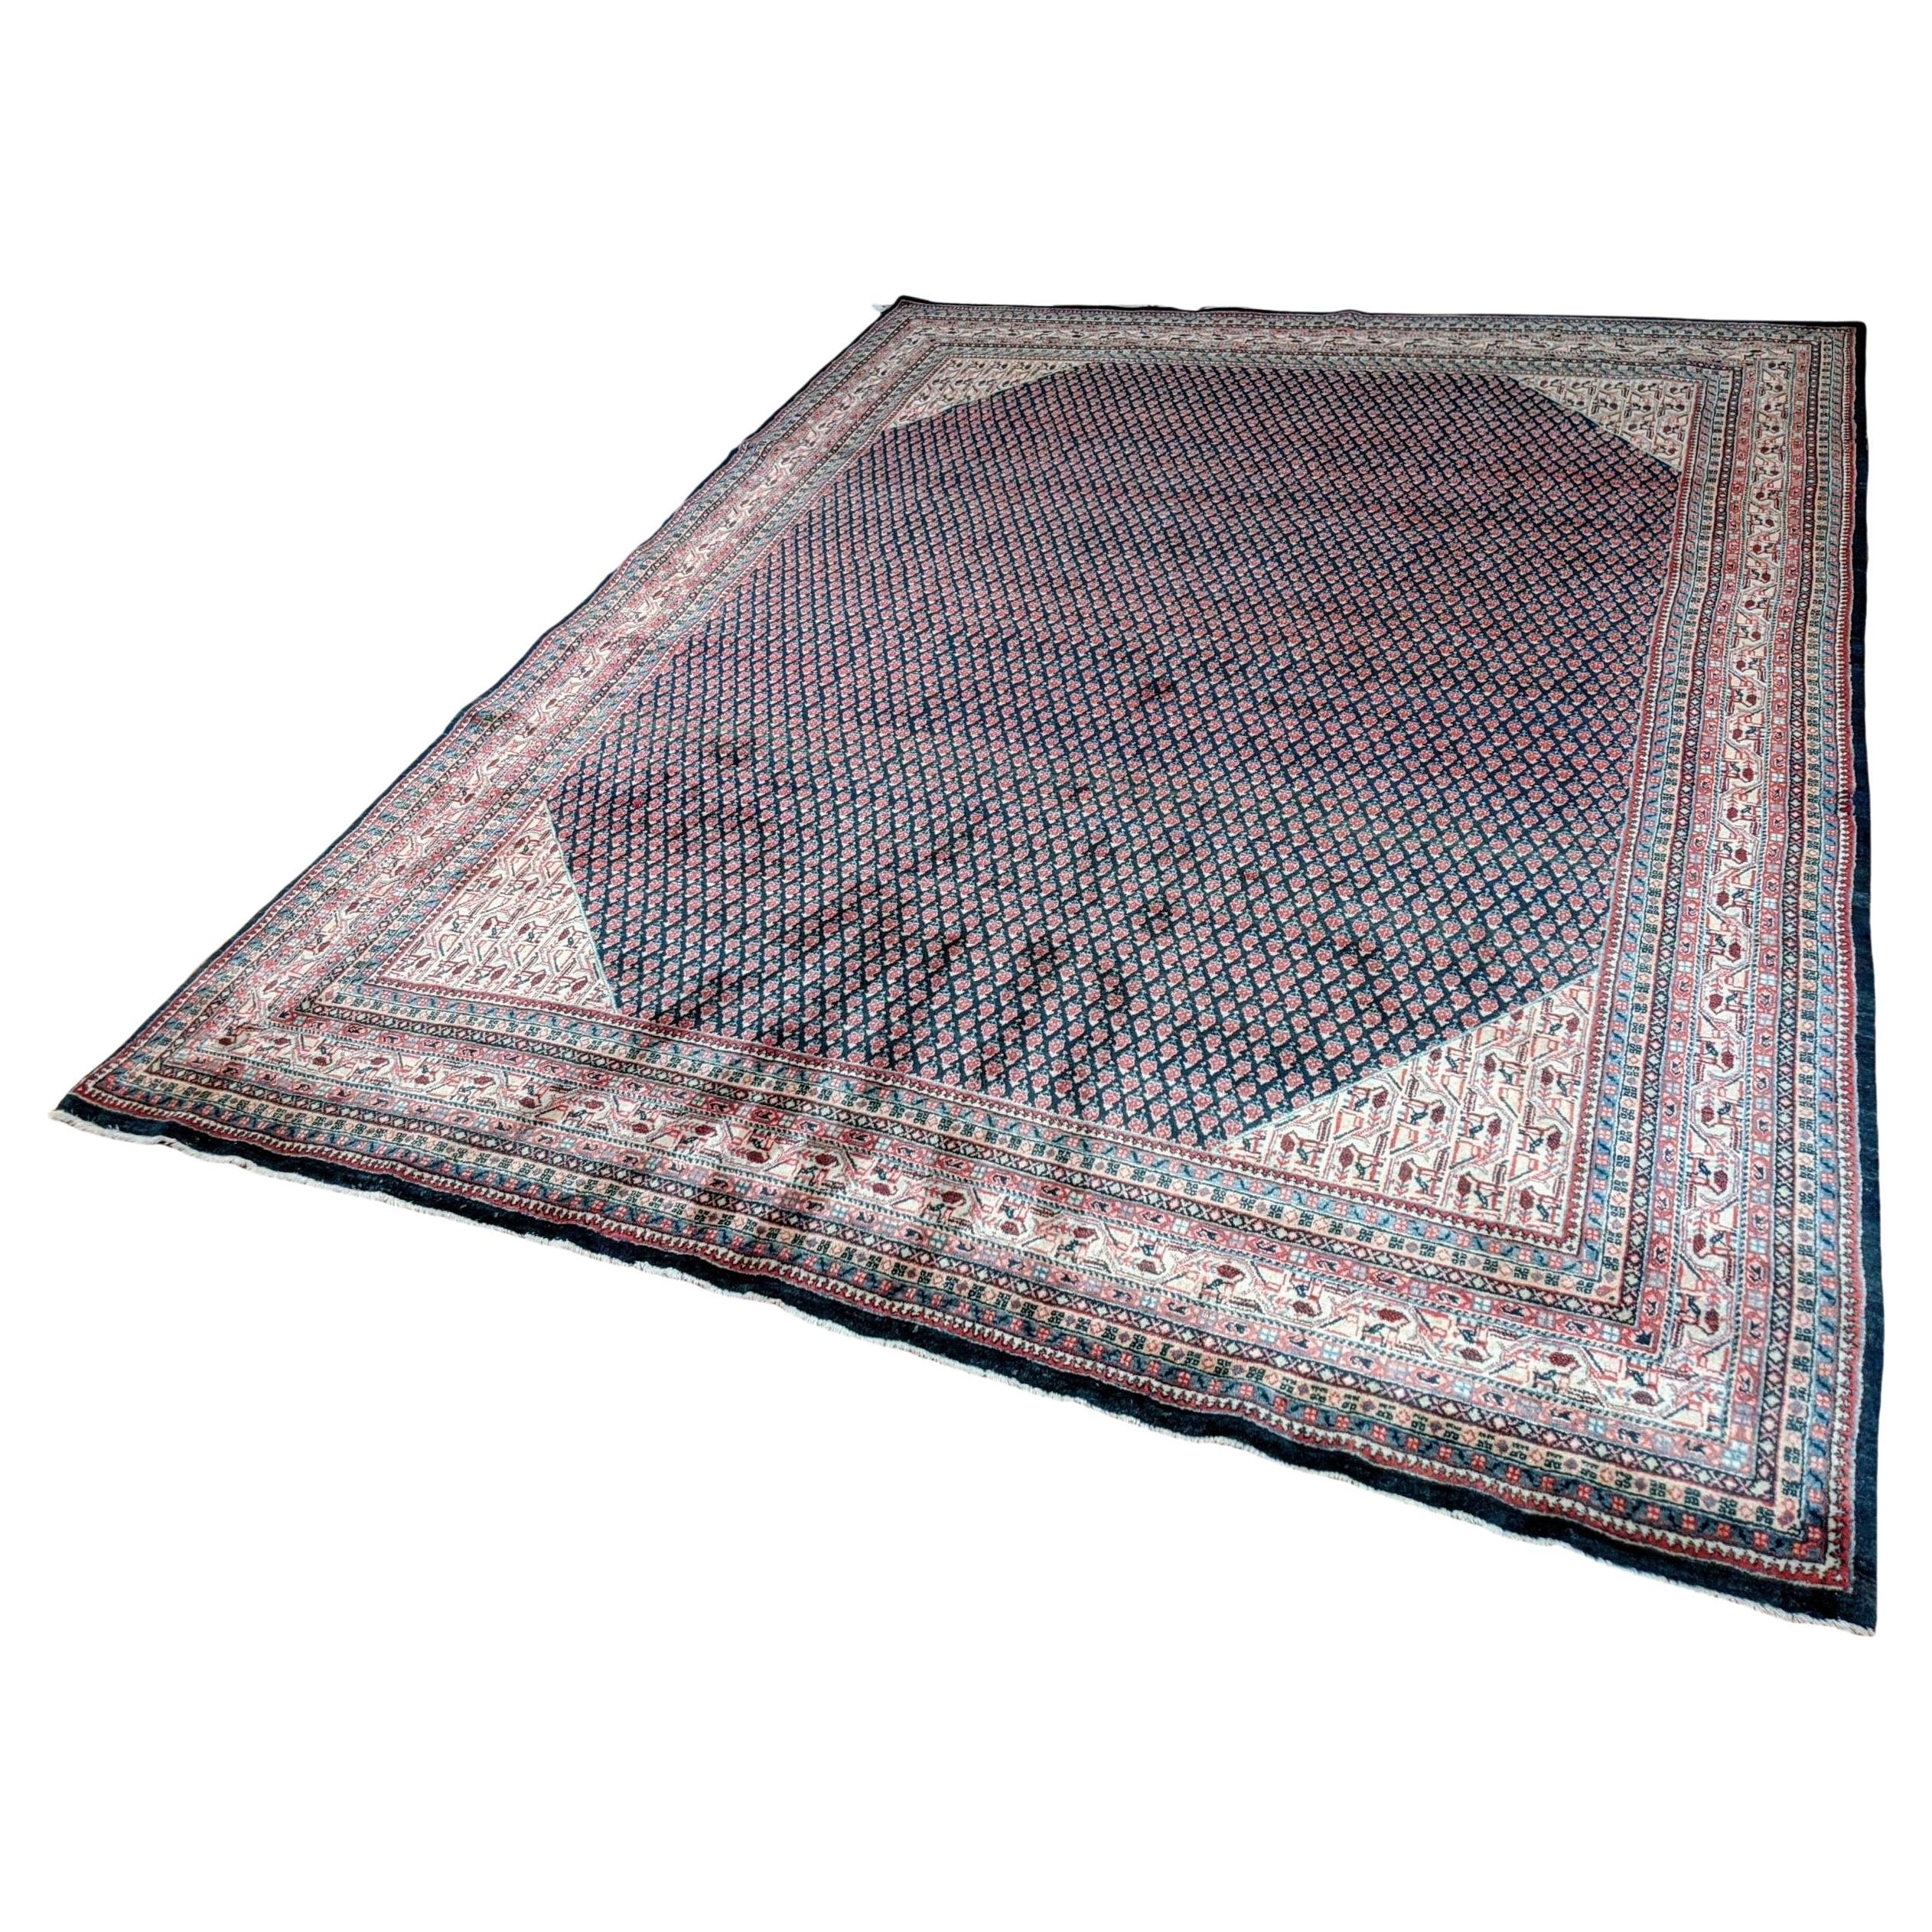 Authentic Handknotted Persian Mir 1940s Rug 9'x12' For Sale